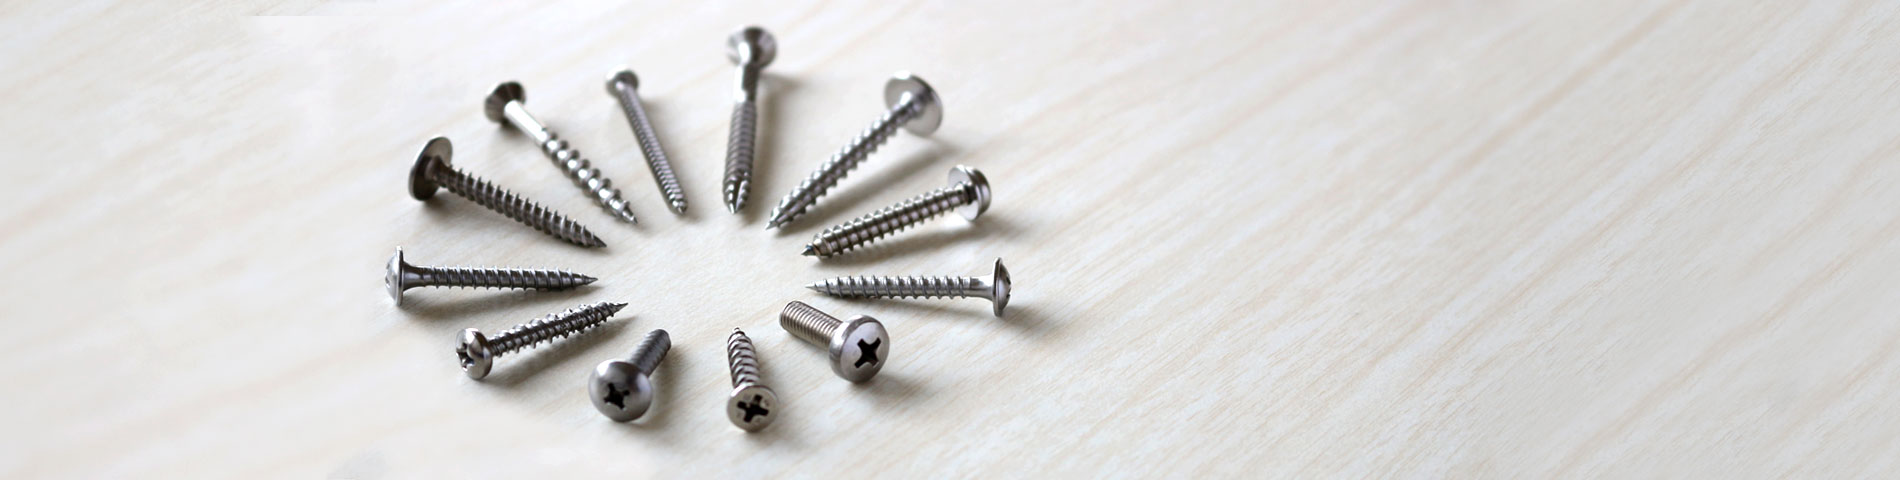 Quality Stainless Steel Screws